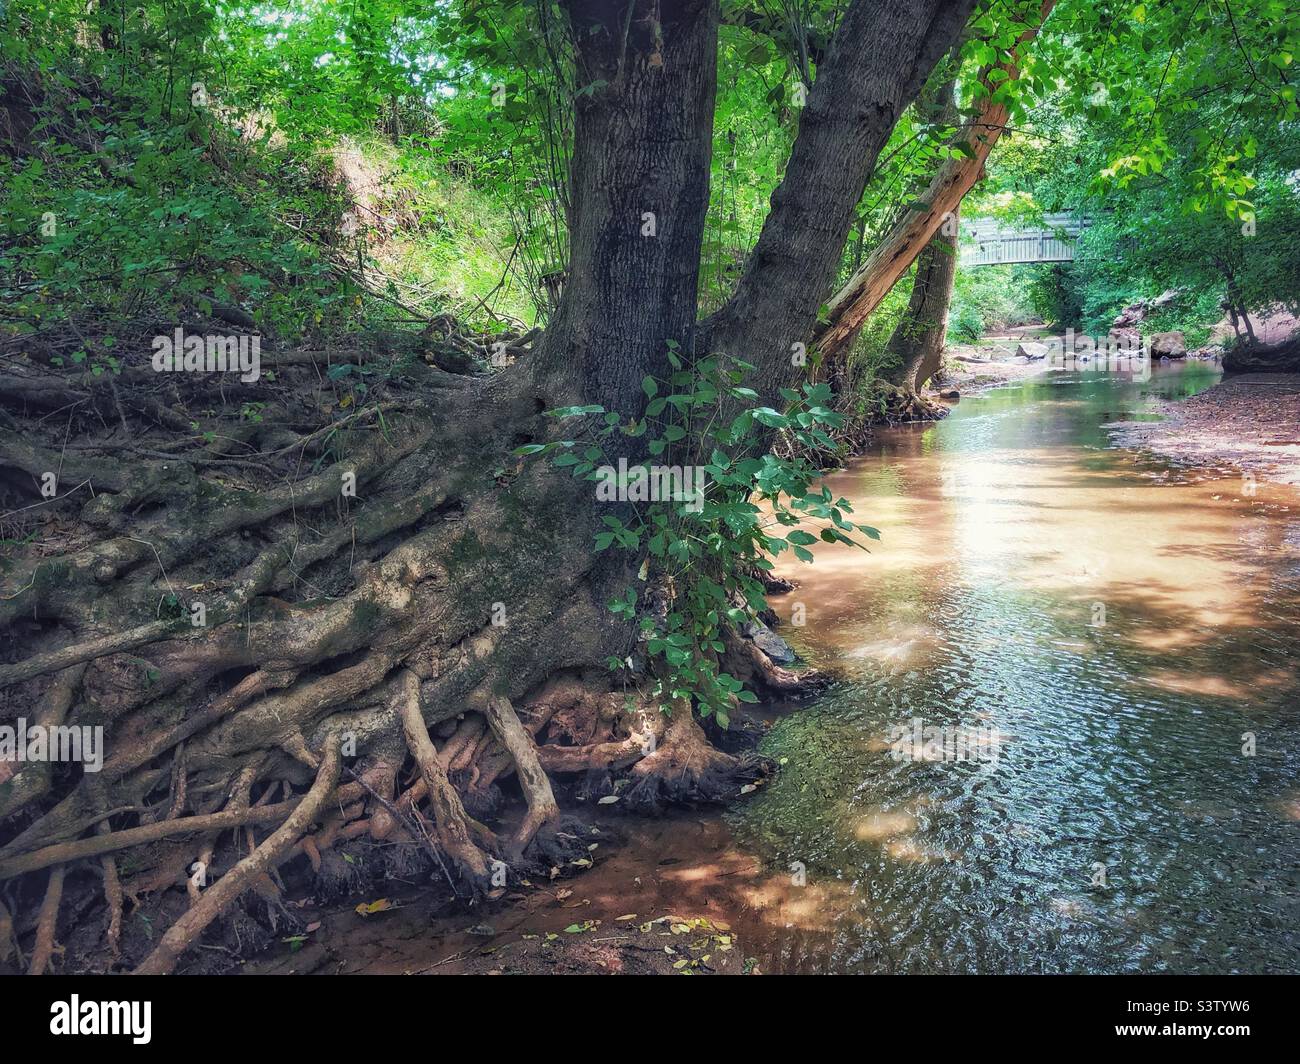 Tree and roots along the creek bank, with bridge in background Stock Photo